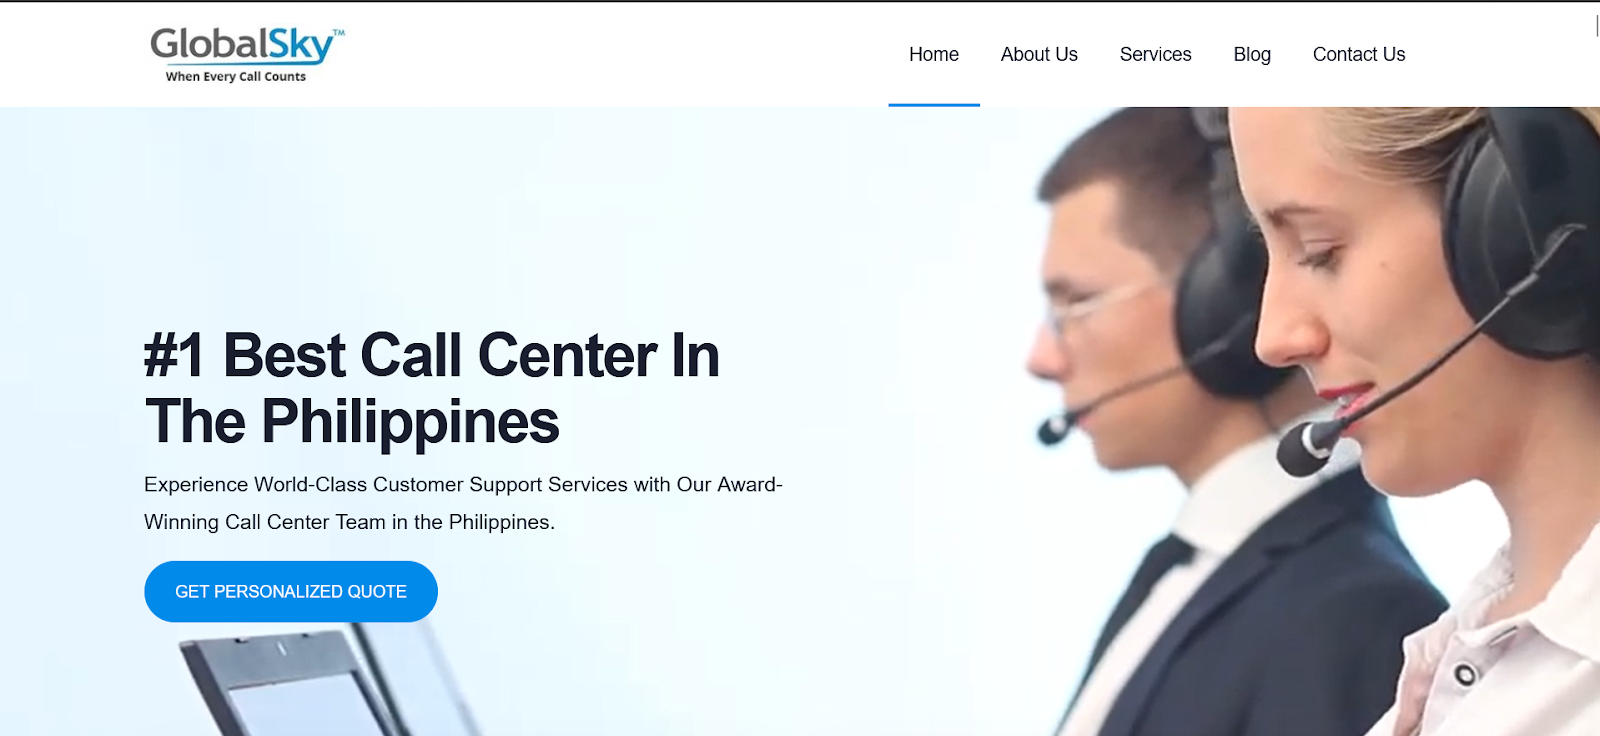 GlobalSky  - Top 10 Call Centers in the Philippines